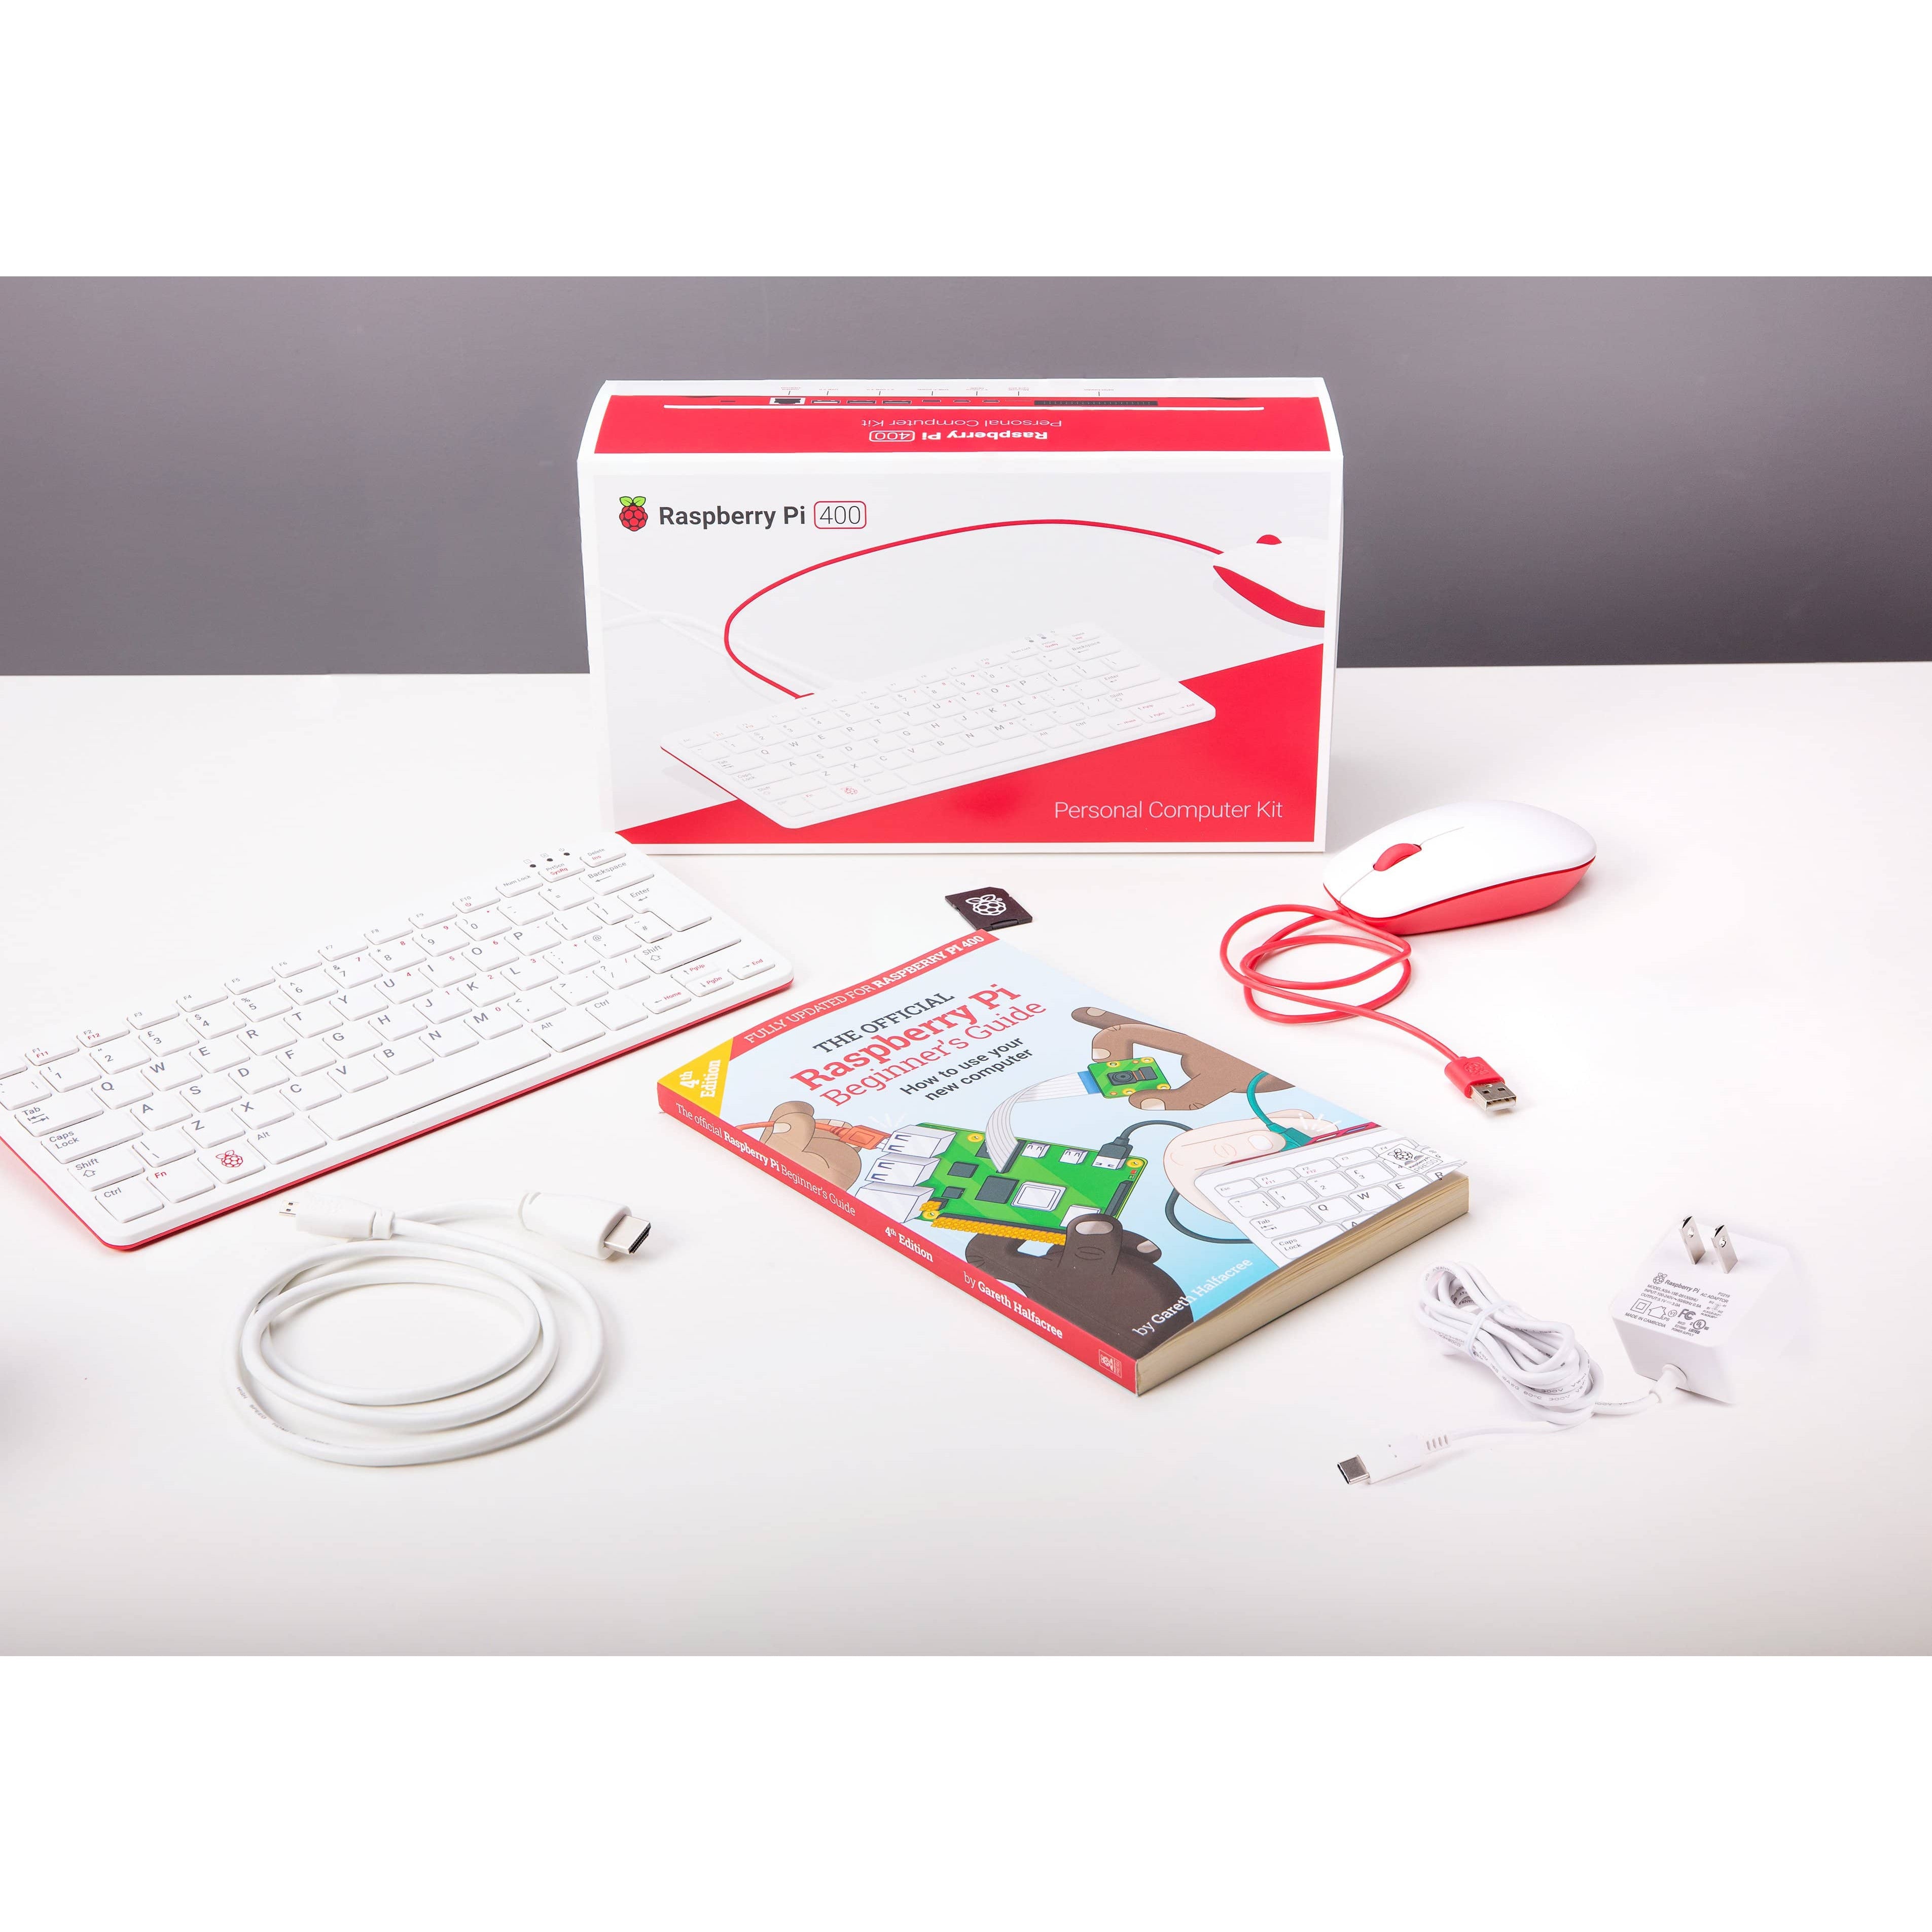 Raspberry Pi 400: These new kits bundle a touchscreen with the